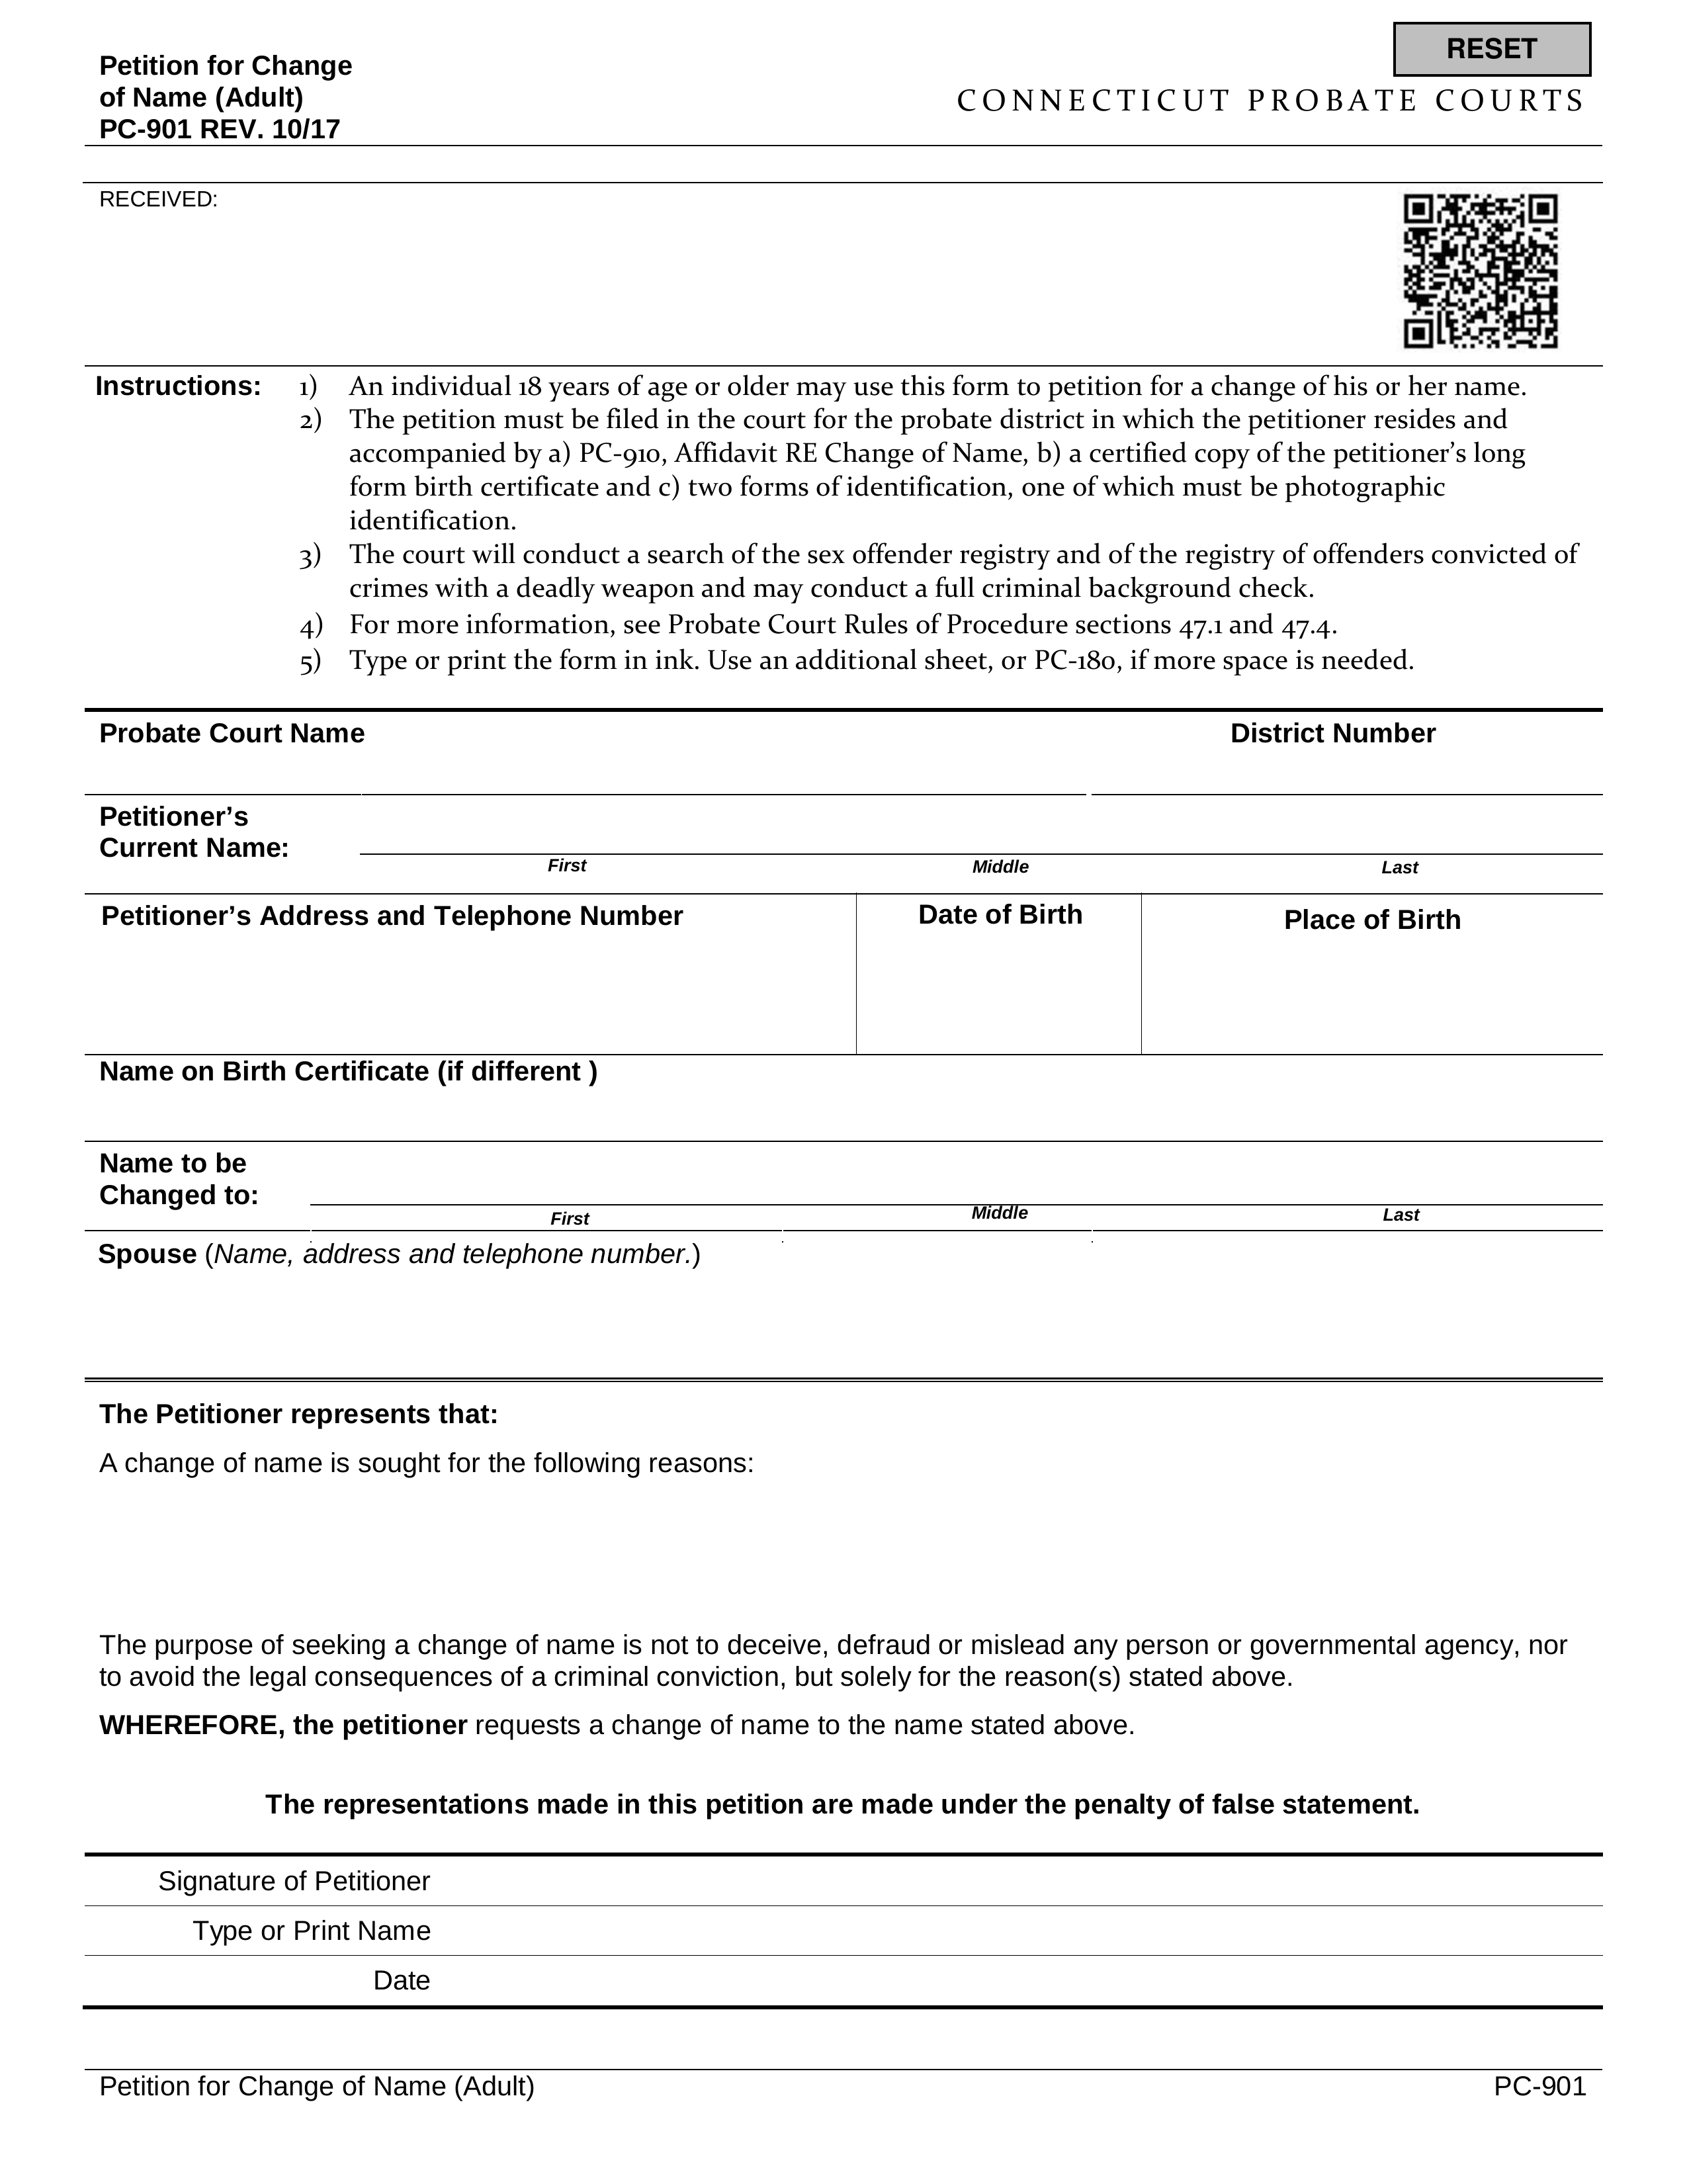 Connecticut Name Change Forms | PC-901